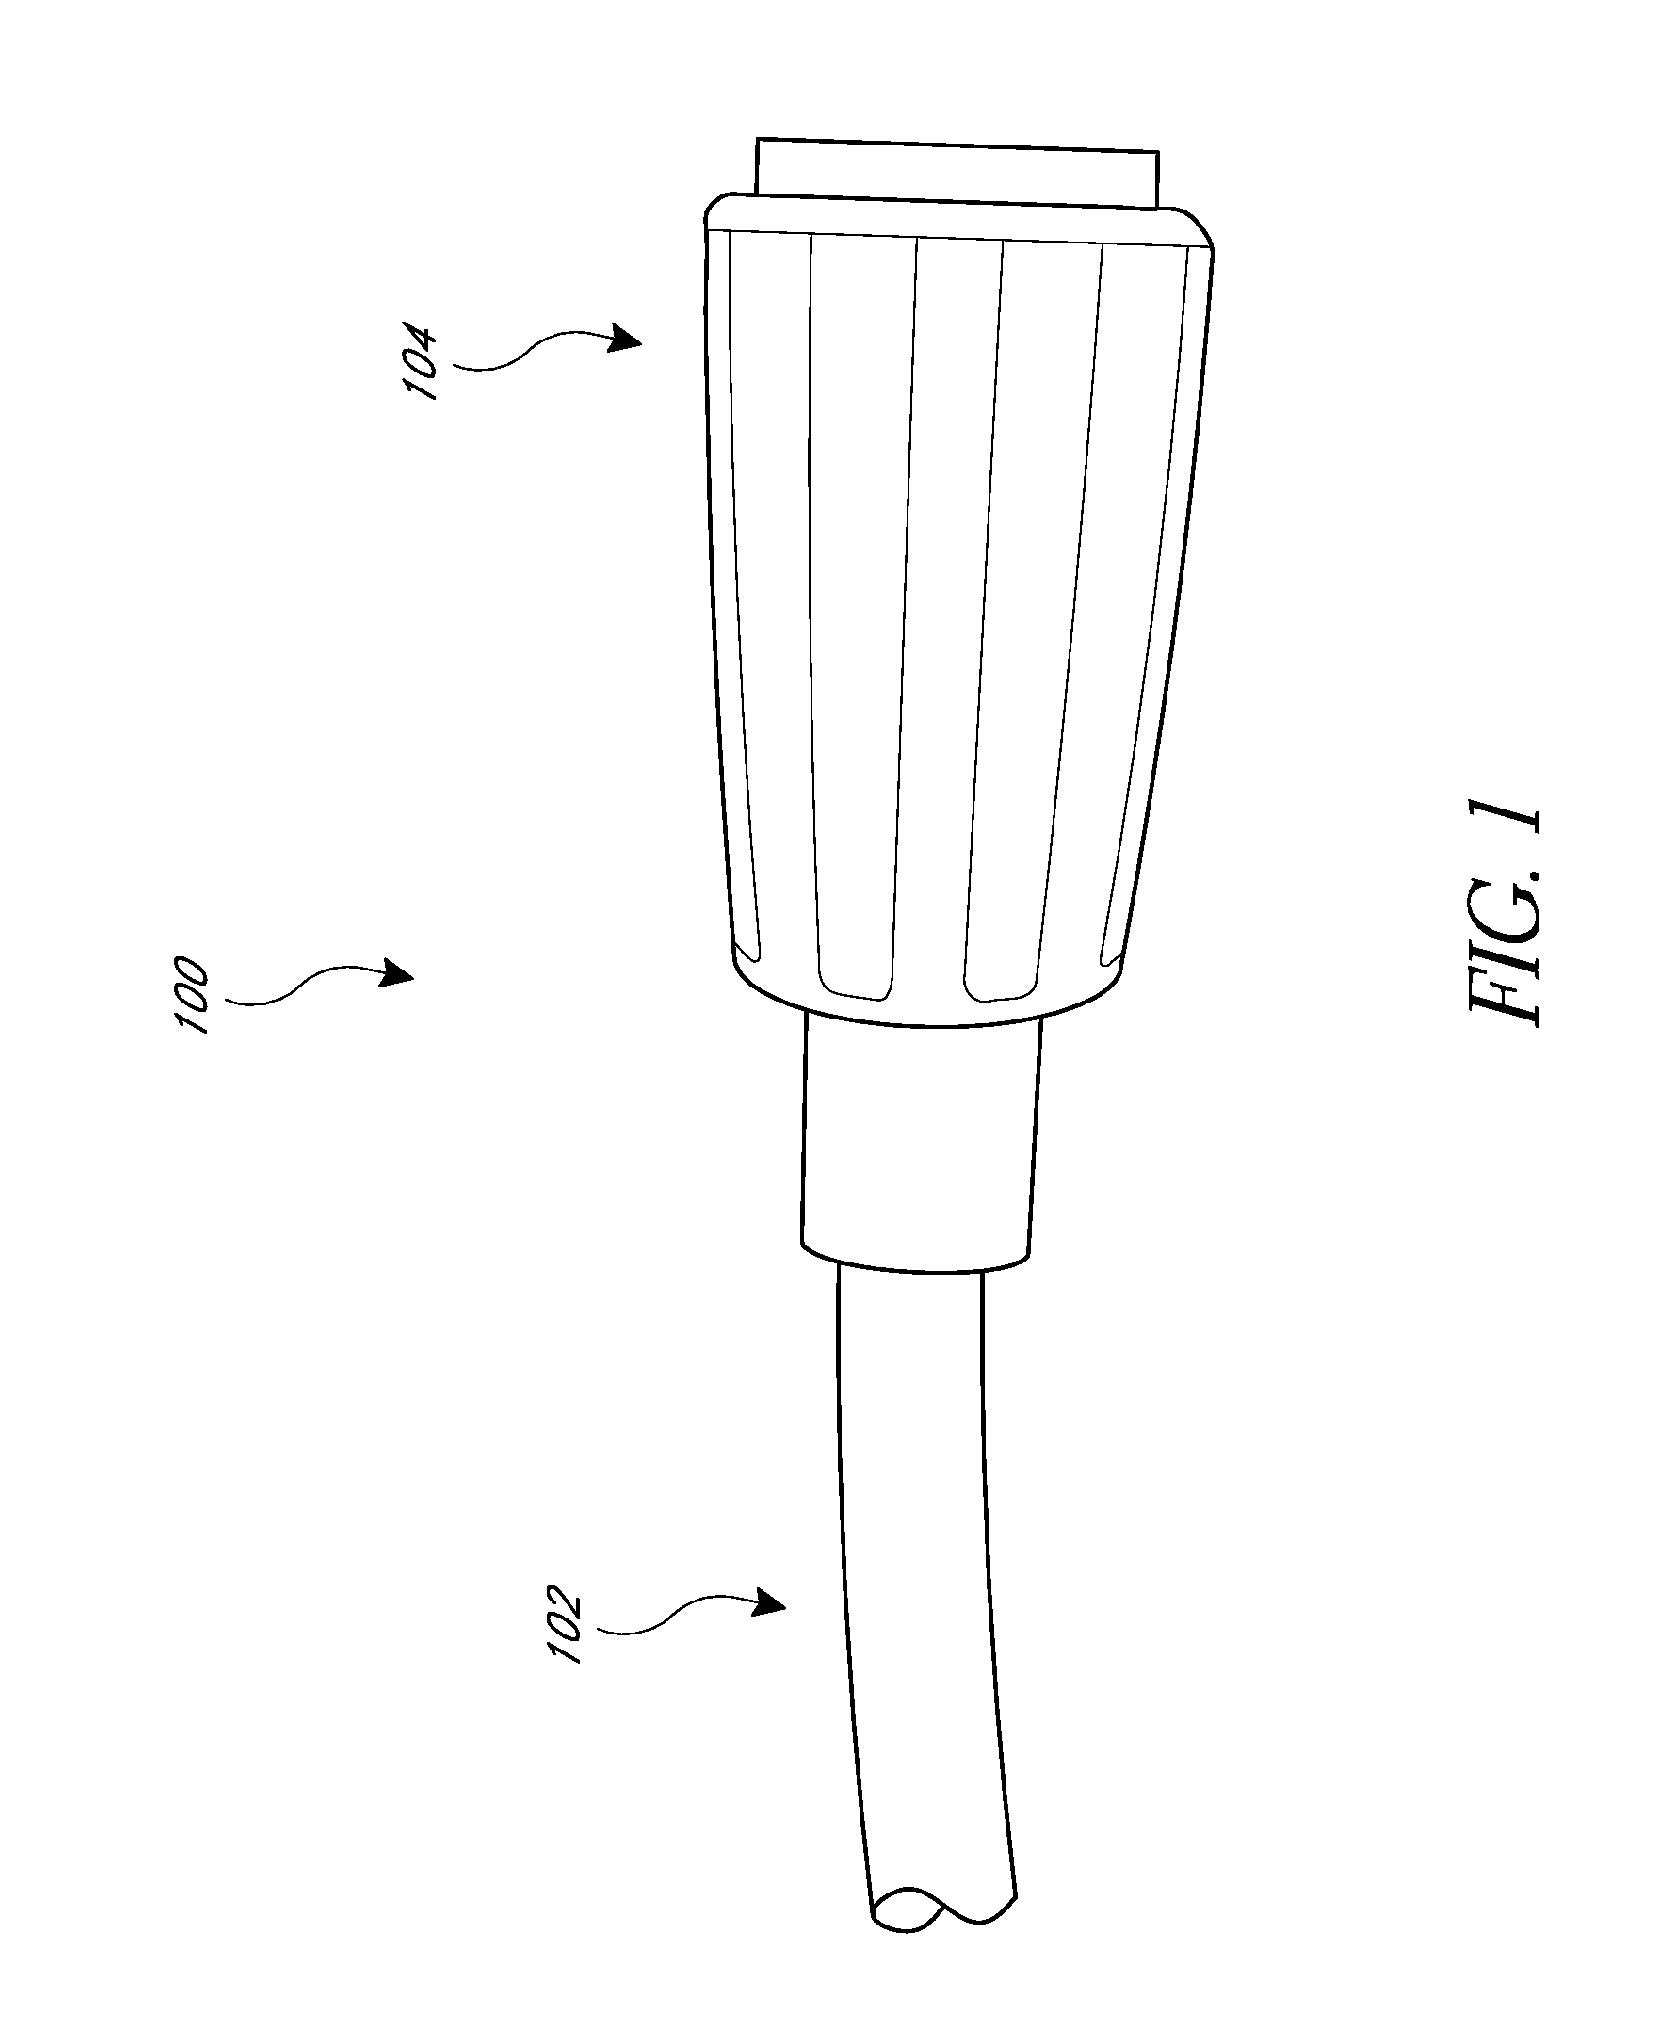 Apparatus and method for providing gases to a user